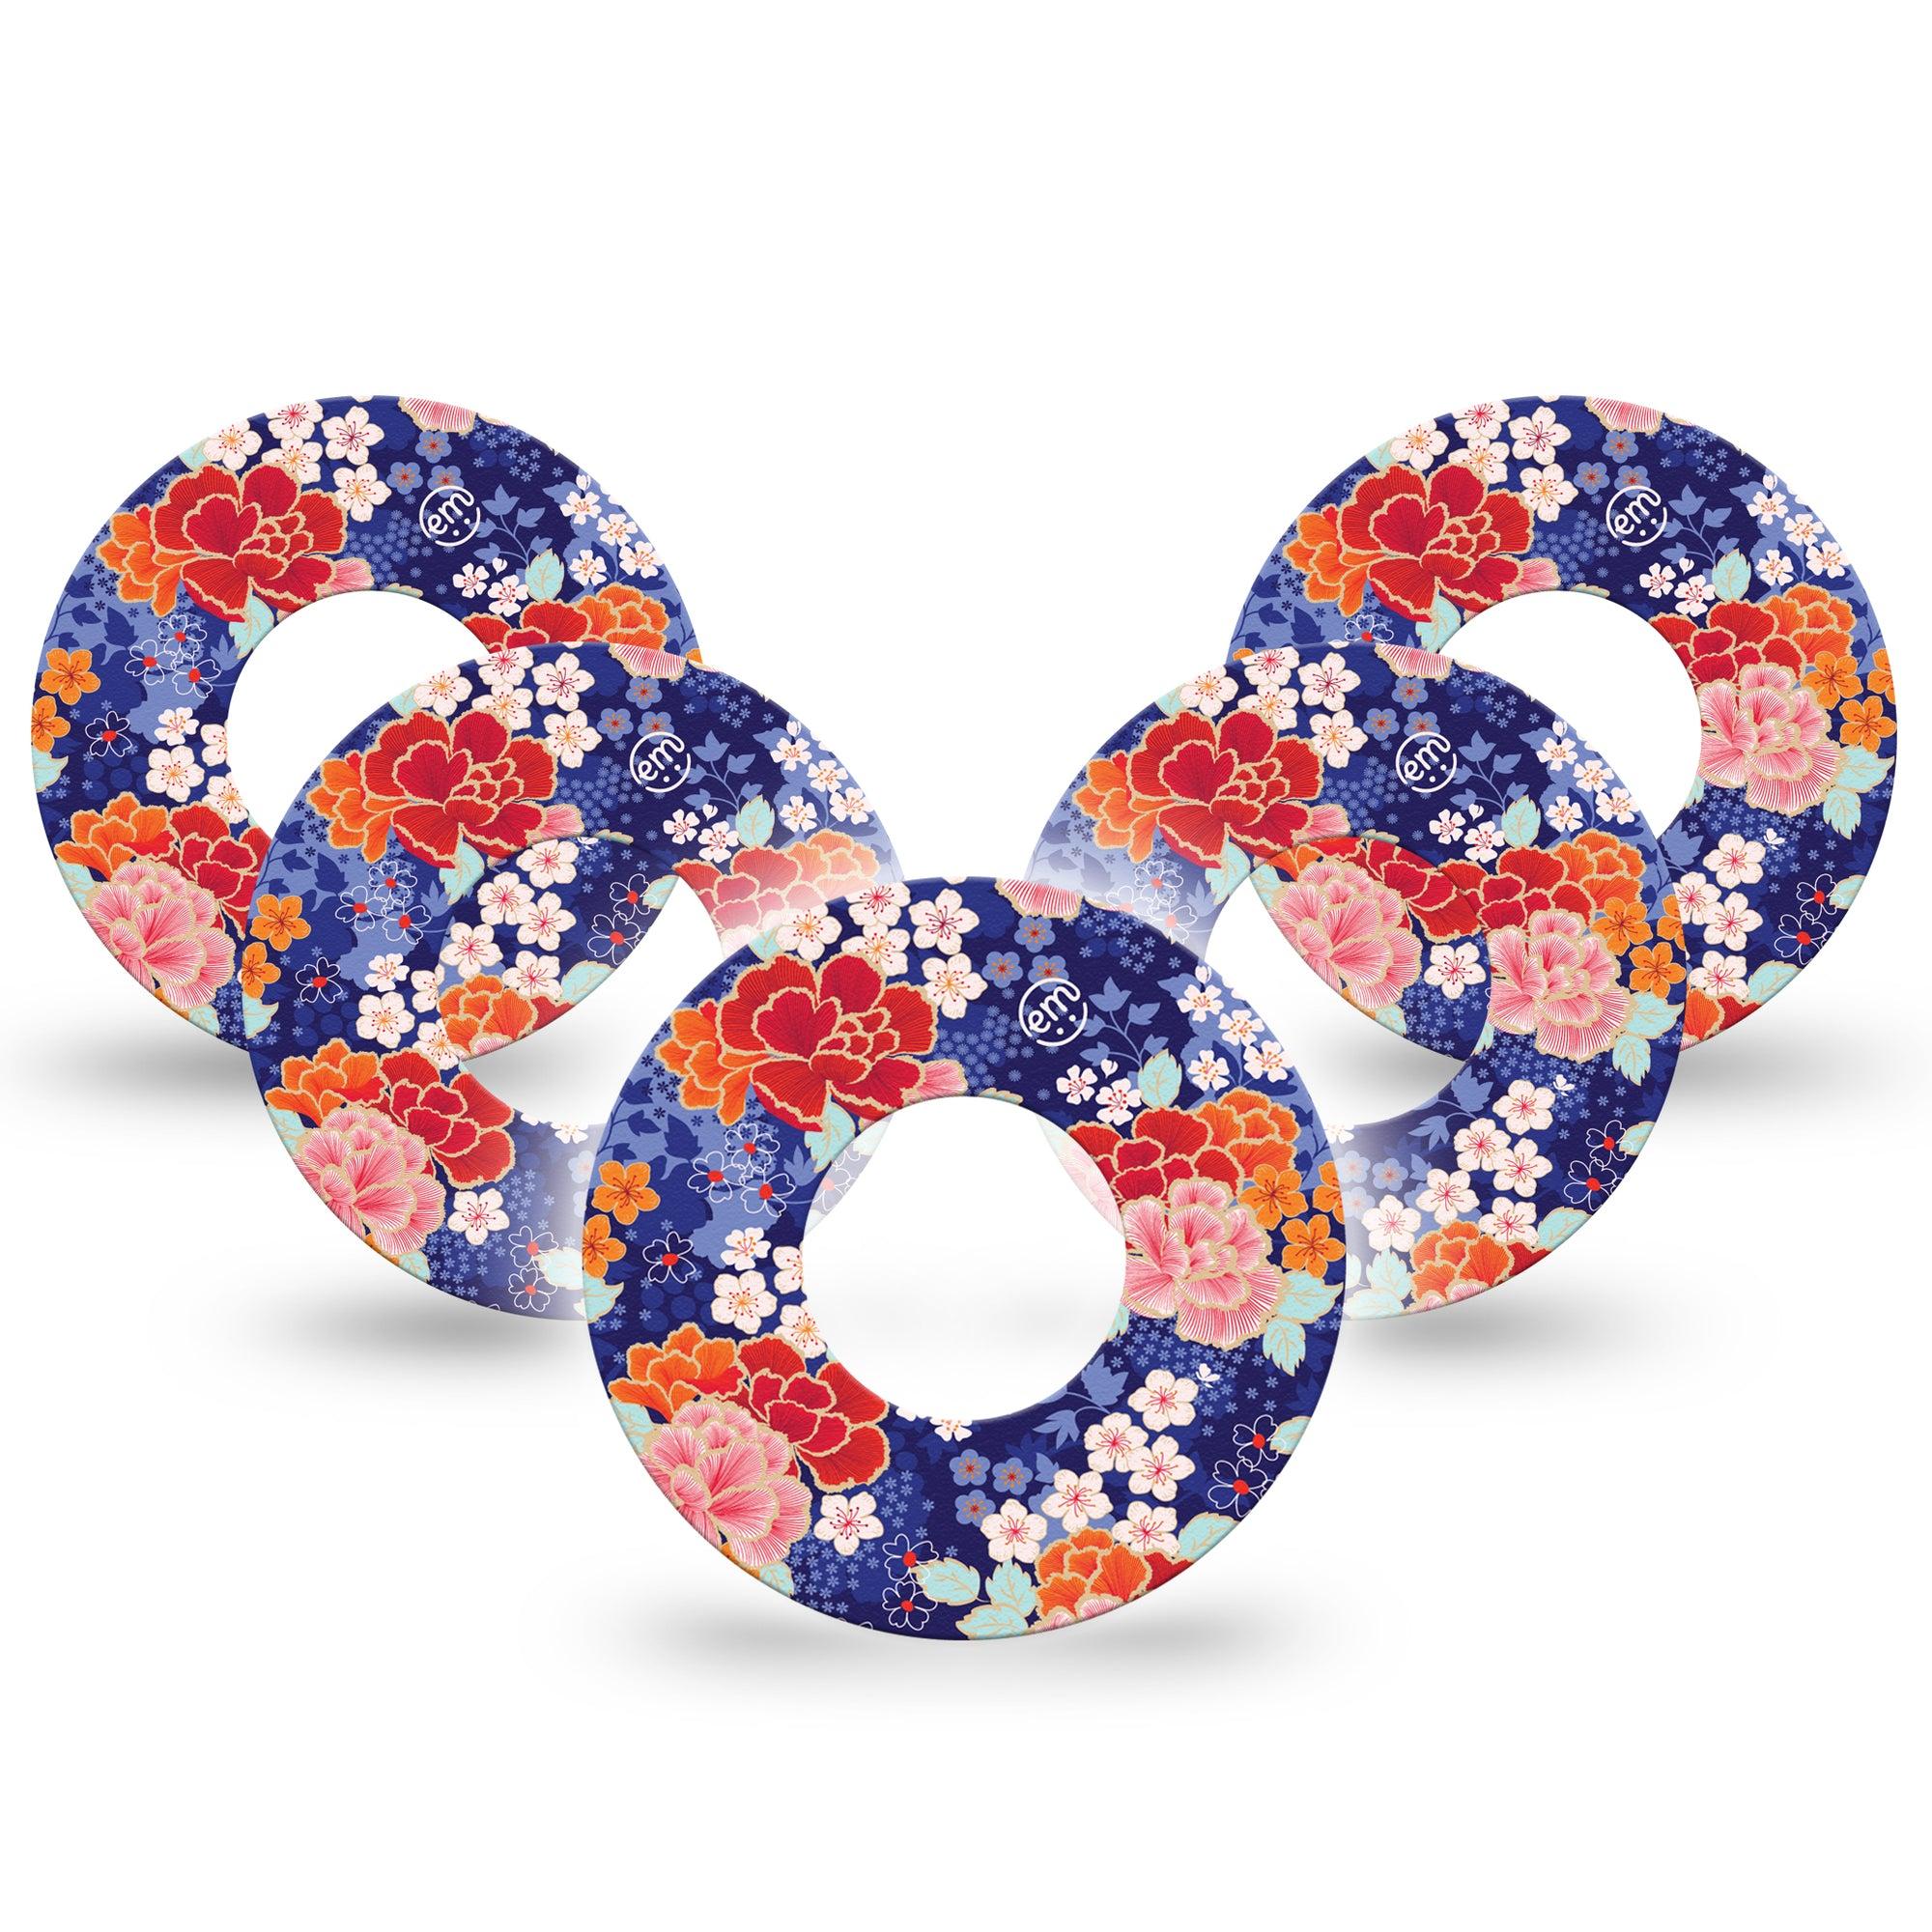 Chinoise Flowers Libre 2 Tape, 5-Pack, Blossom Decorations Themed, CGM Plaster Patch Design